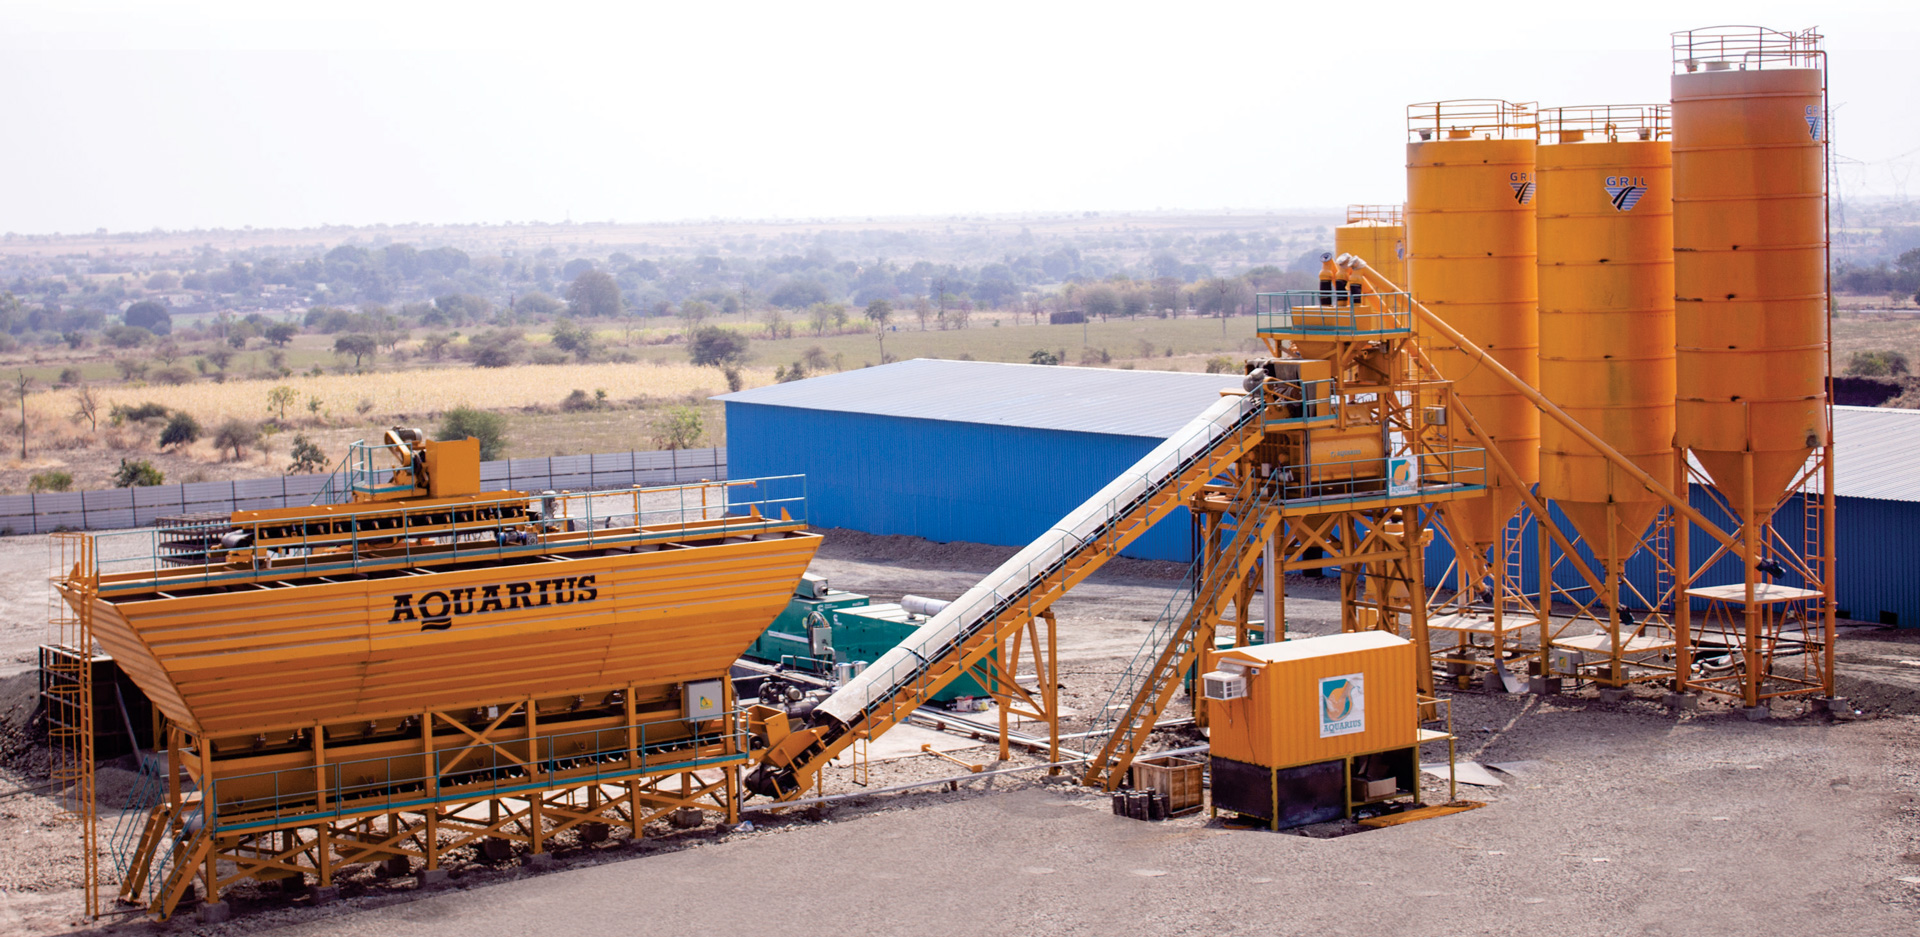 Aquarius SP 120C Batching Plant working at G R INFRA PROJECTS LTD. for AKKALKOT-SOLAPUR Concrete Road Project